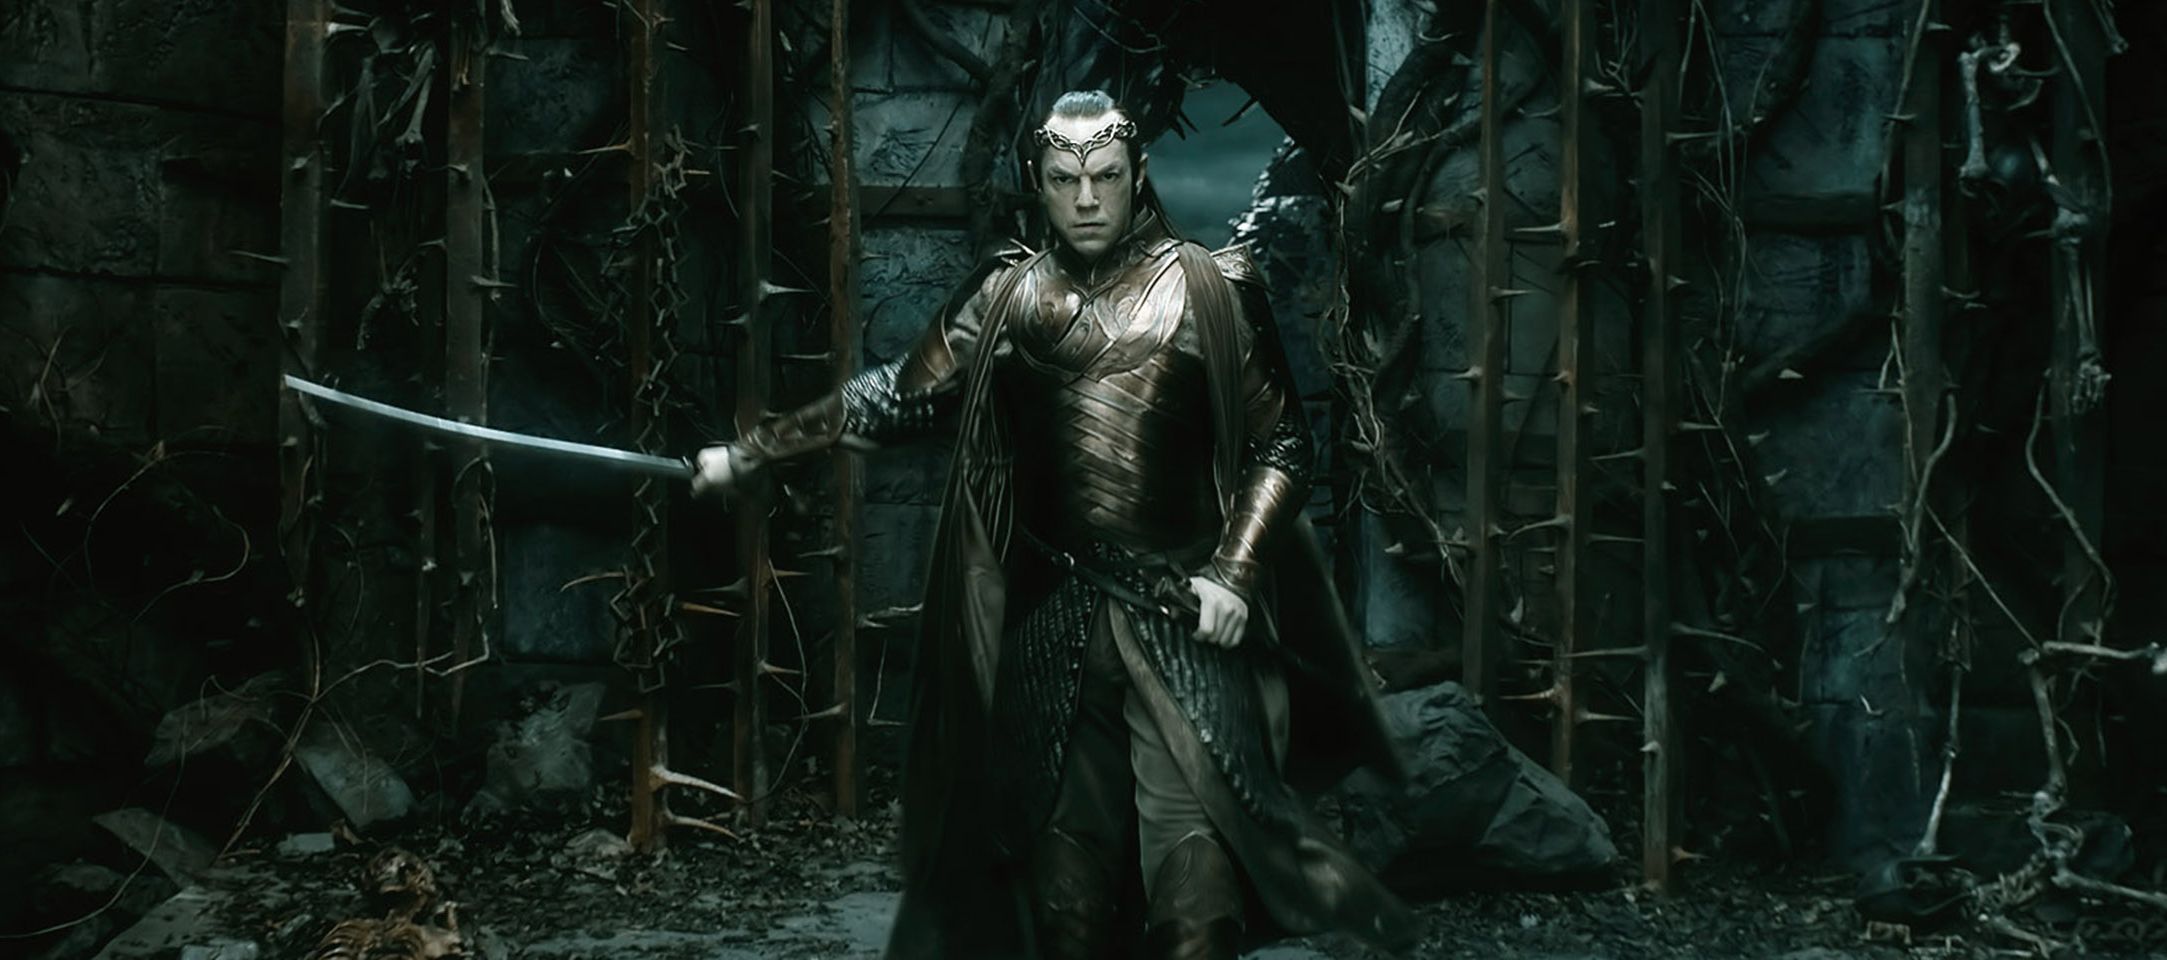 Elrond with sword, ready to fight